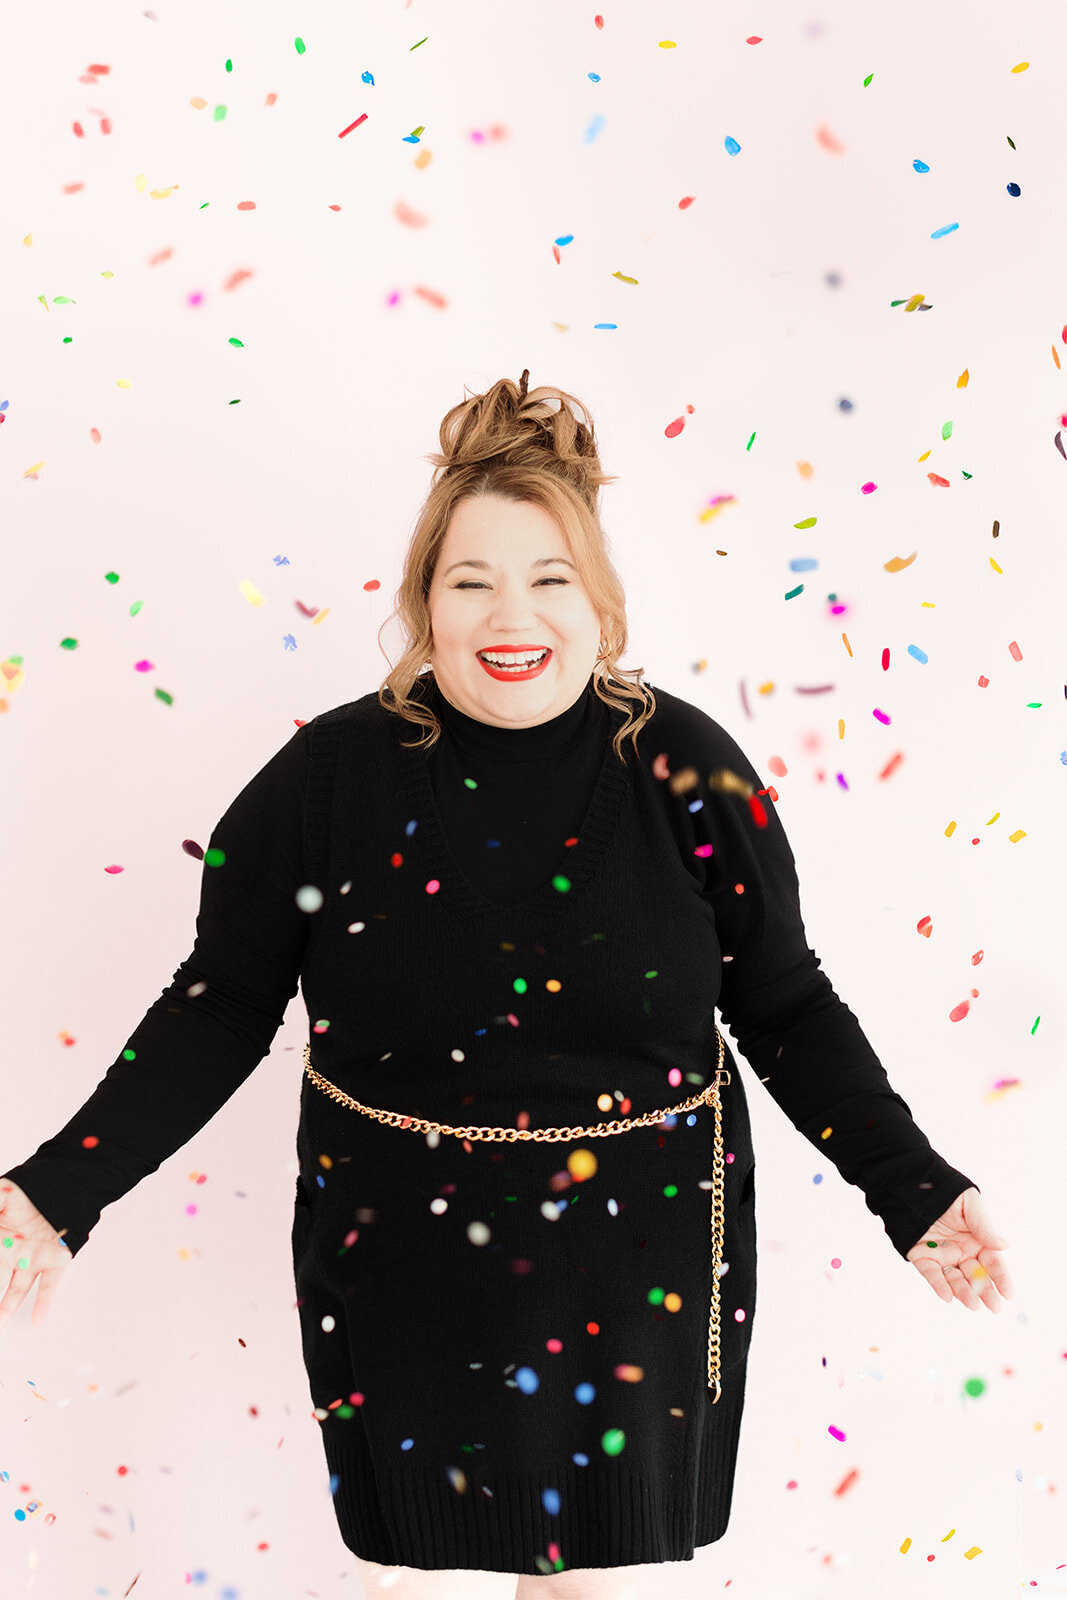 joyful woman in black dress in front of pink backdrop standing in a flurry of confetti and laughing